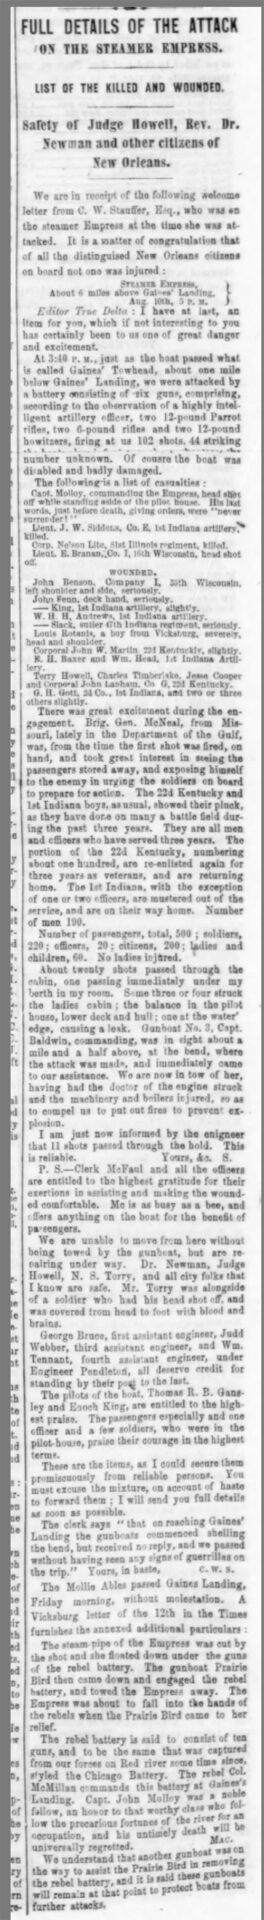 "Full Details of the Attack" newspaper clipping